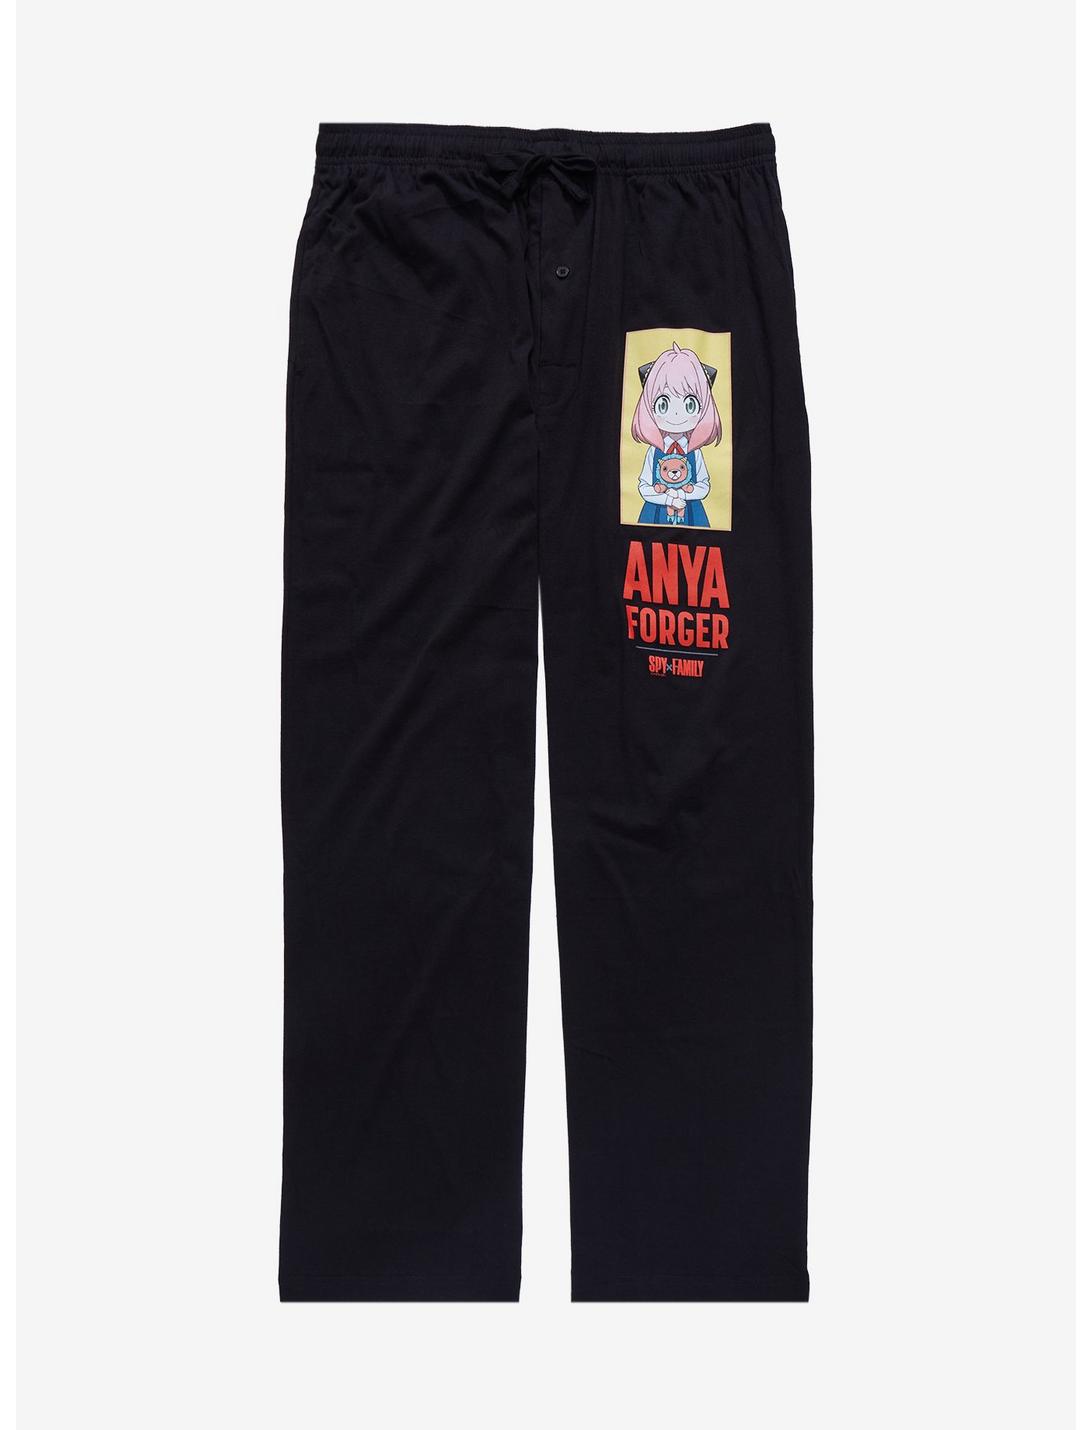 Spy x Family Anya Forger Quarter Panel Sleep Pants - BoxLunch Exclusive, BLACK, hi-res